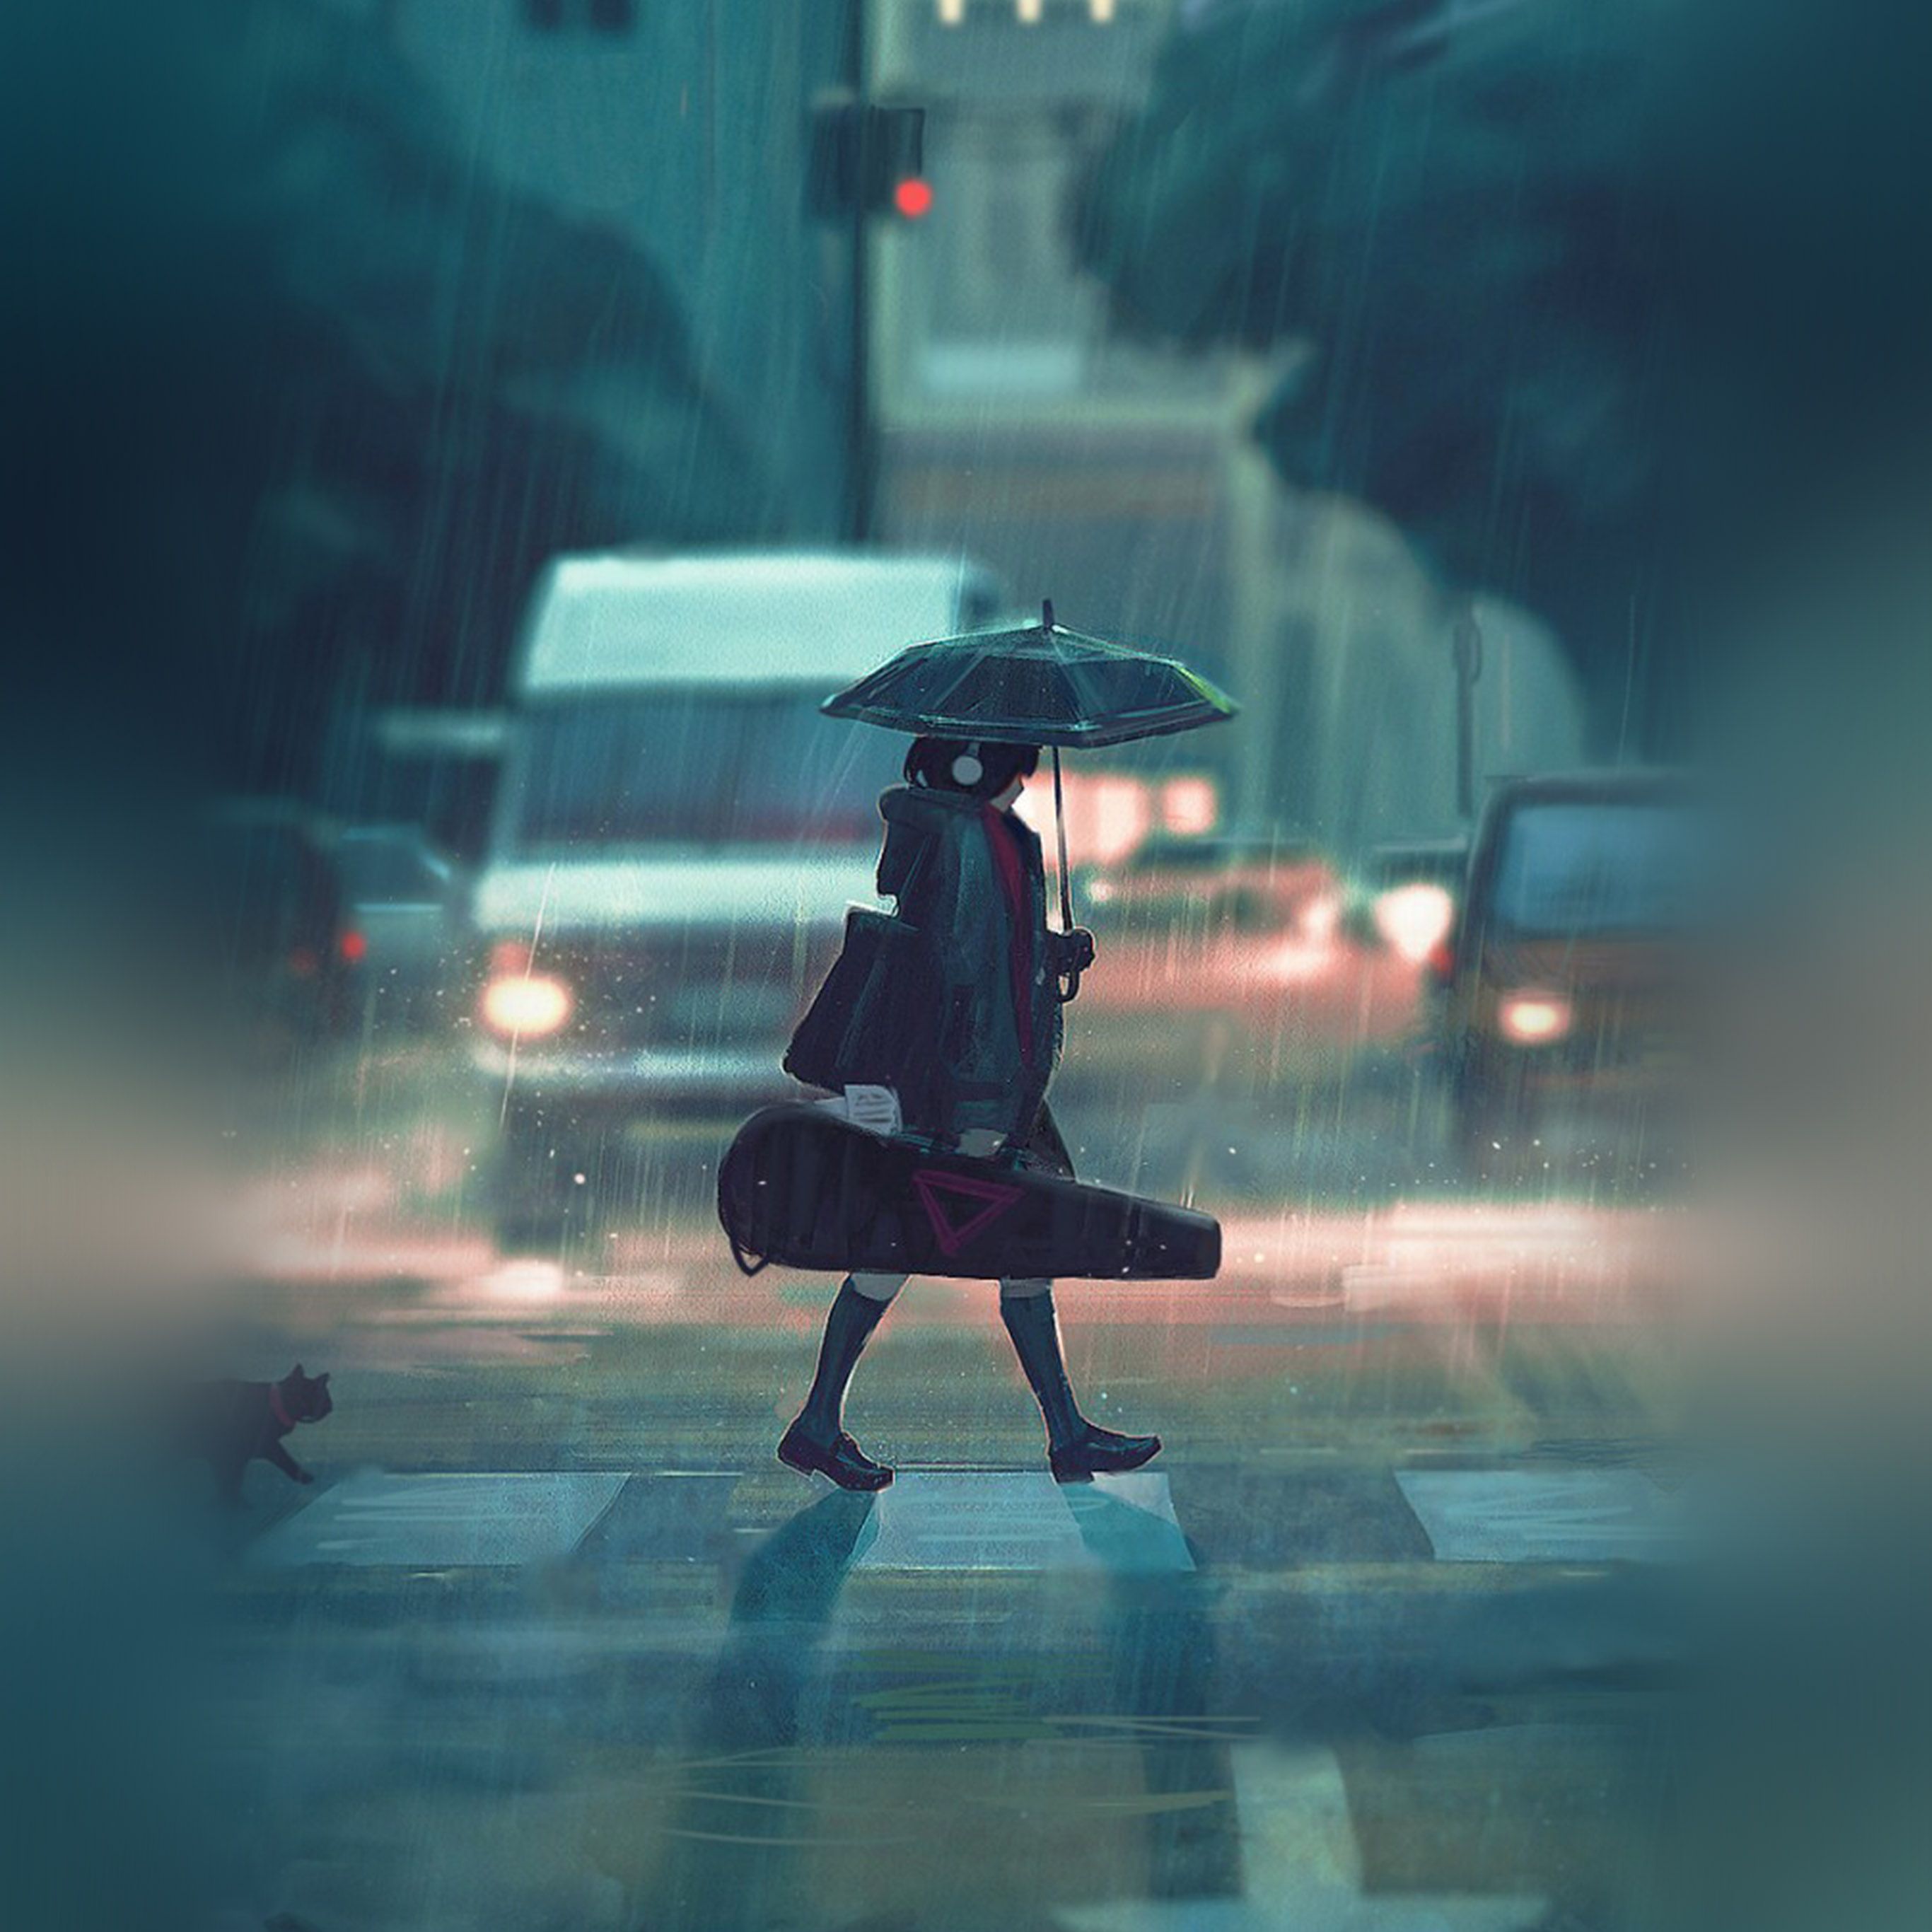 Summer Rain - Finished Projects - Blender Artists Community